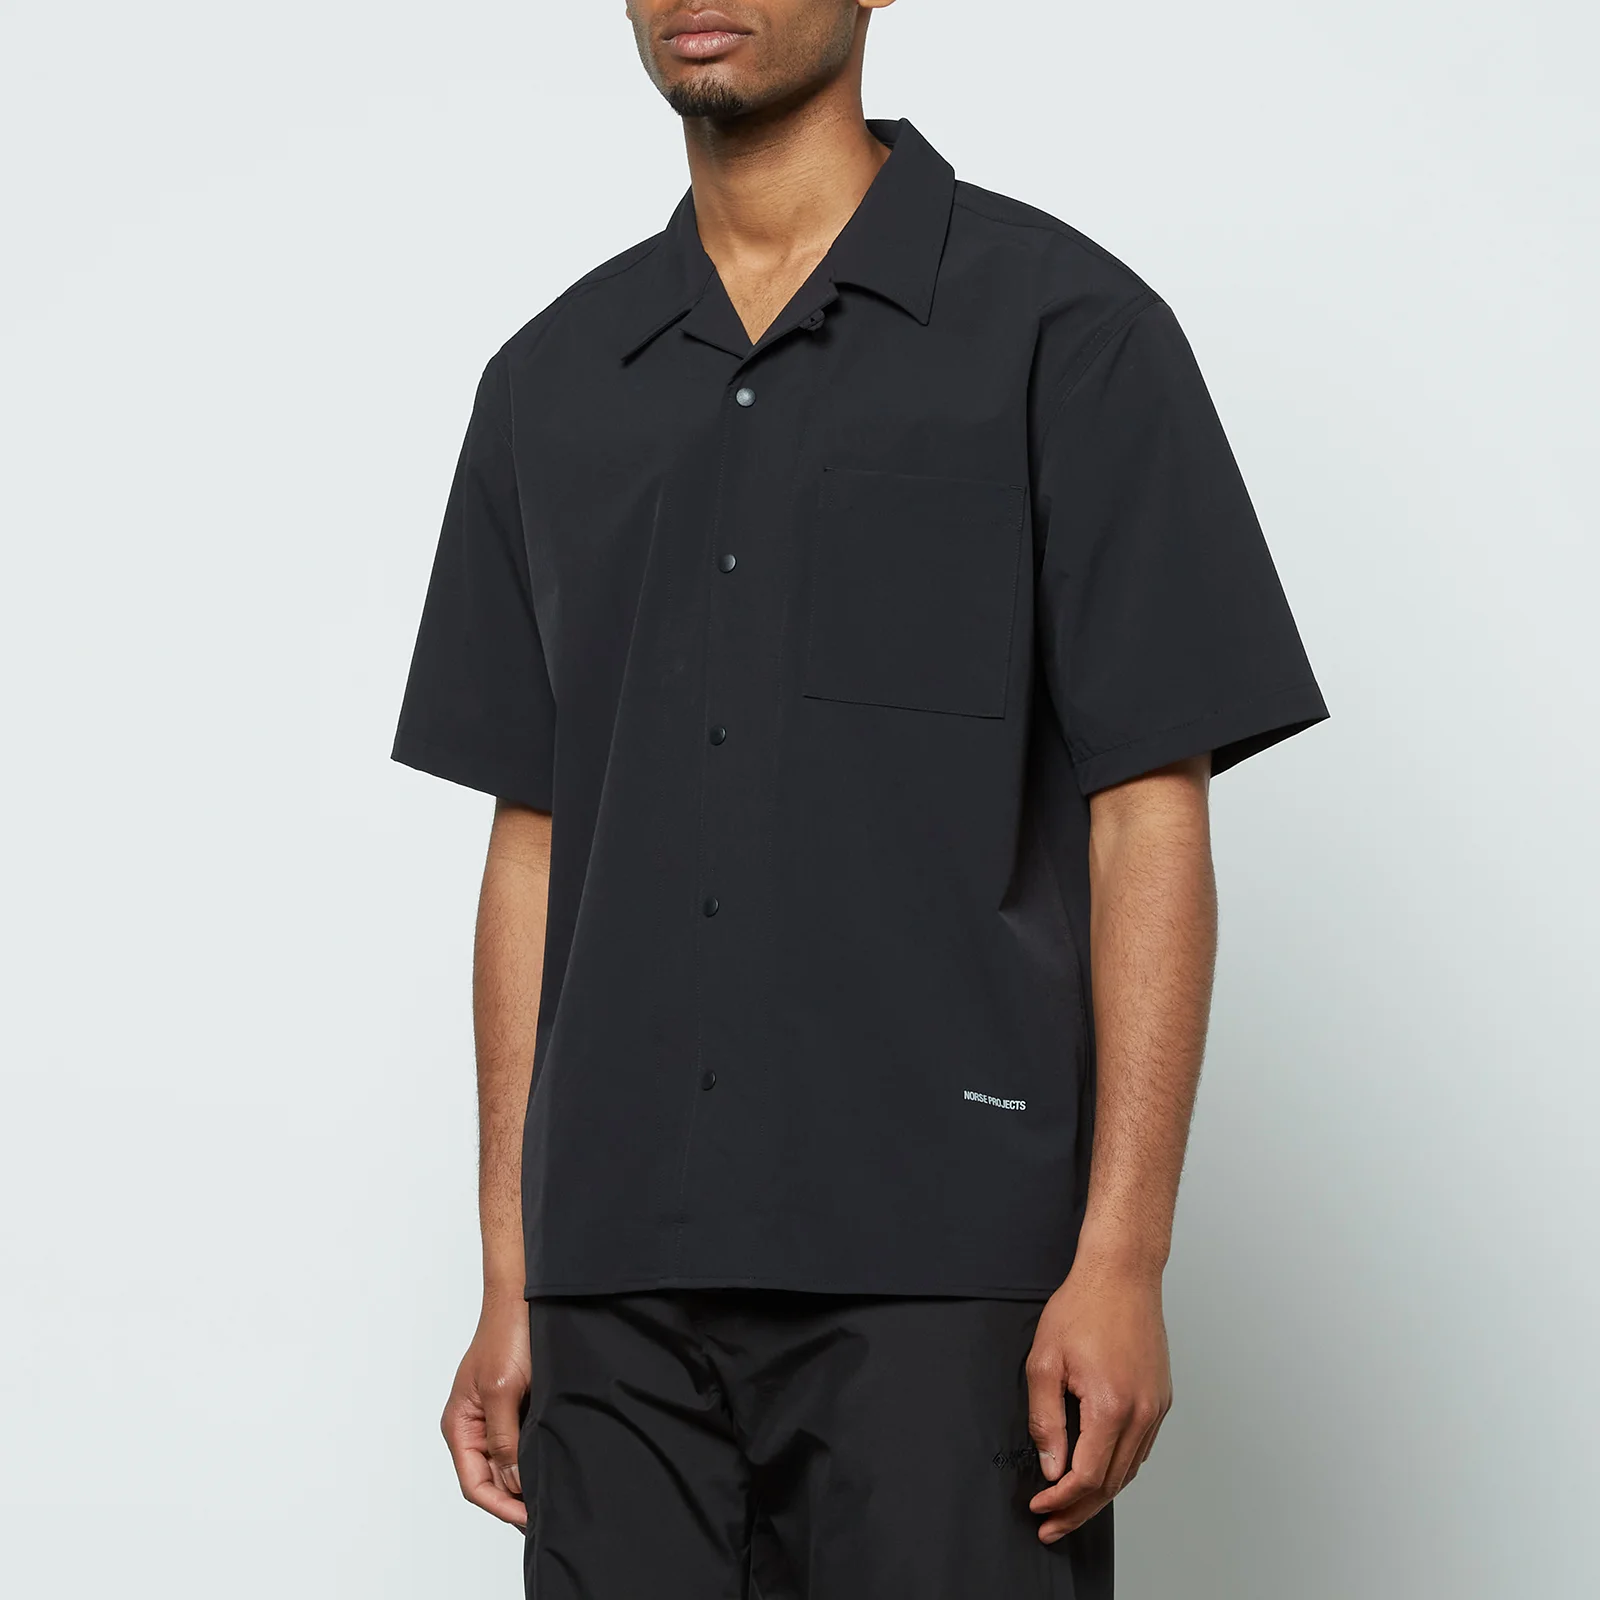 Norse Projects Men's Carsten Travel Solotex Shirt - Black Image 1